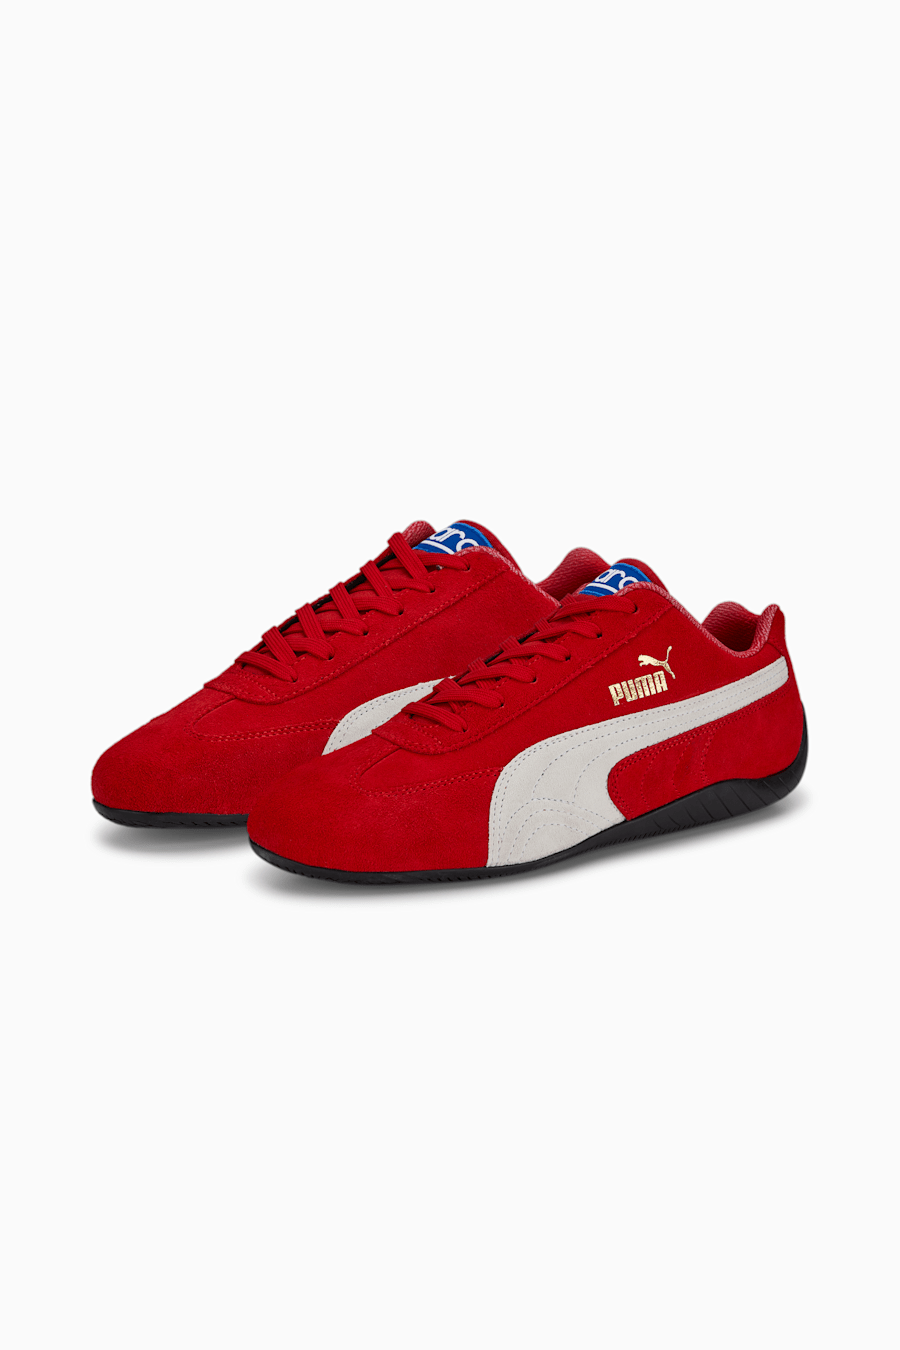 Trainer trends 2024 - Puma's "Speedcat" sneakers, first introduced in 1981, still skillfully bring the Formula 1 aesthetic into the urban context. With their racy lines and eye-catching colors, they are set to conquer 2024 at lightning speed. (And thus continue the success story of 2003 - the year when they led the sales figures.)